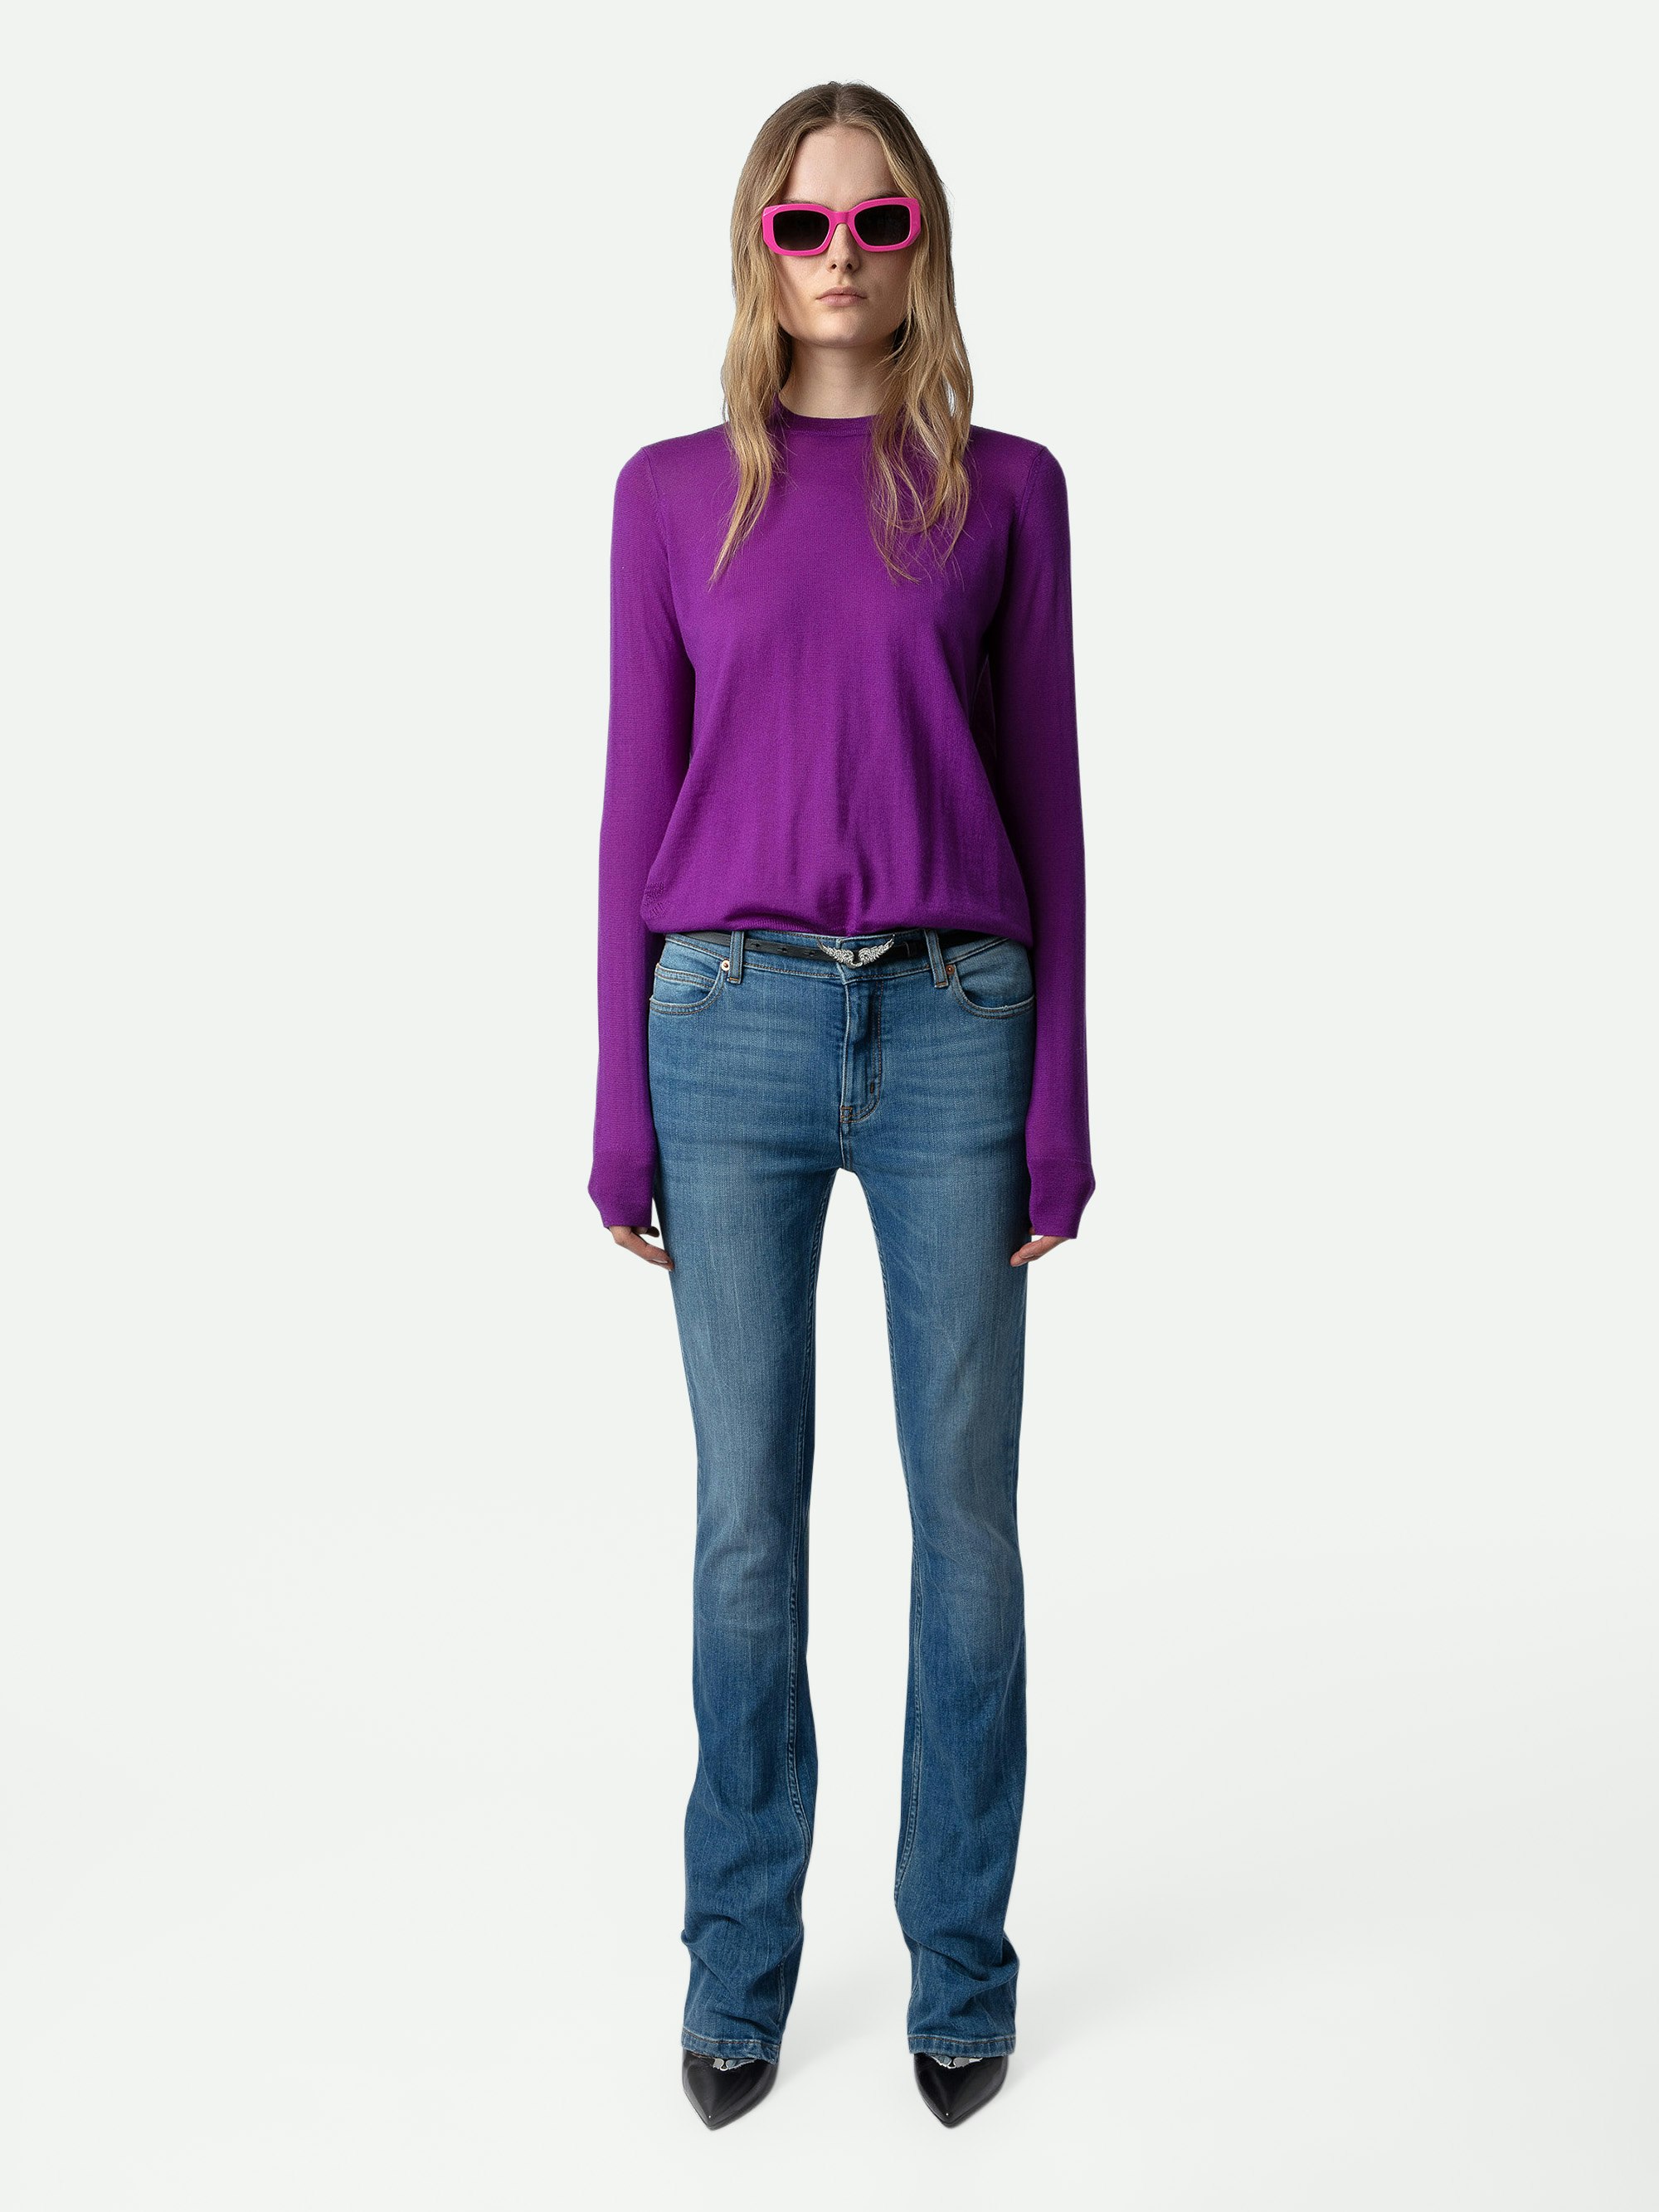 Emma Sweater - Purple merino wool round-neck sweater with long sleeves and open crossover back.